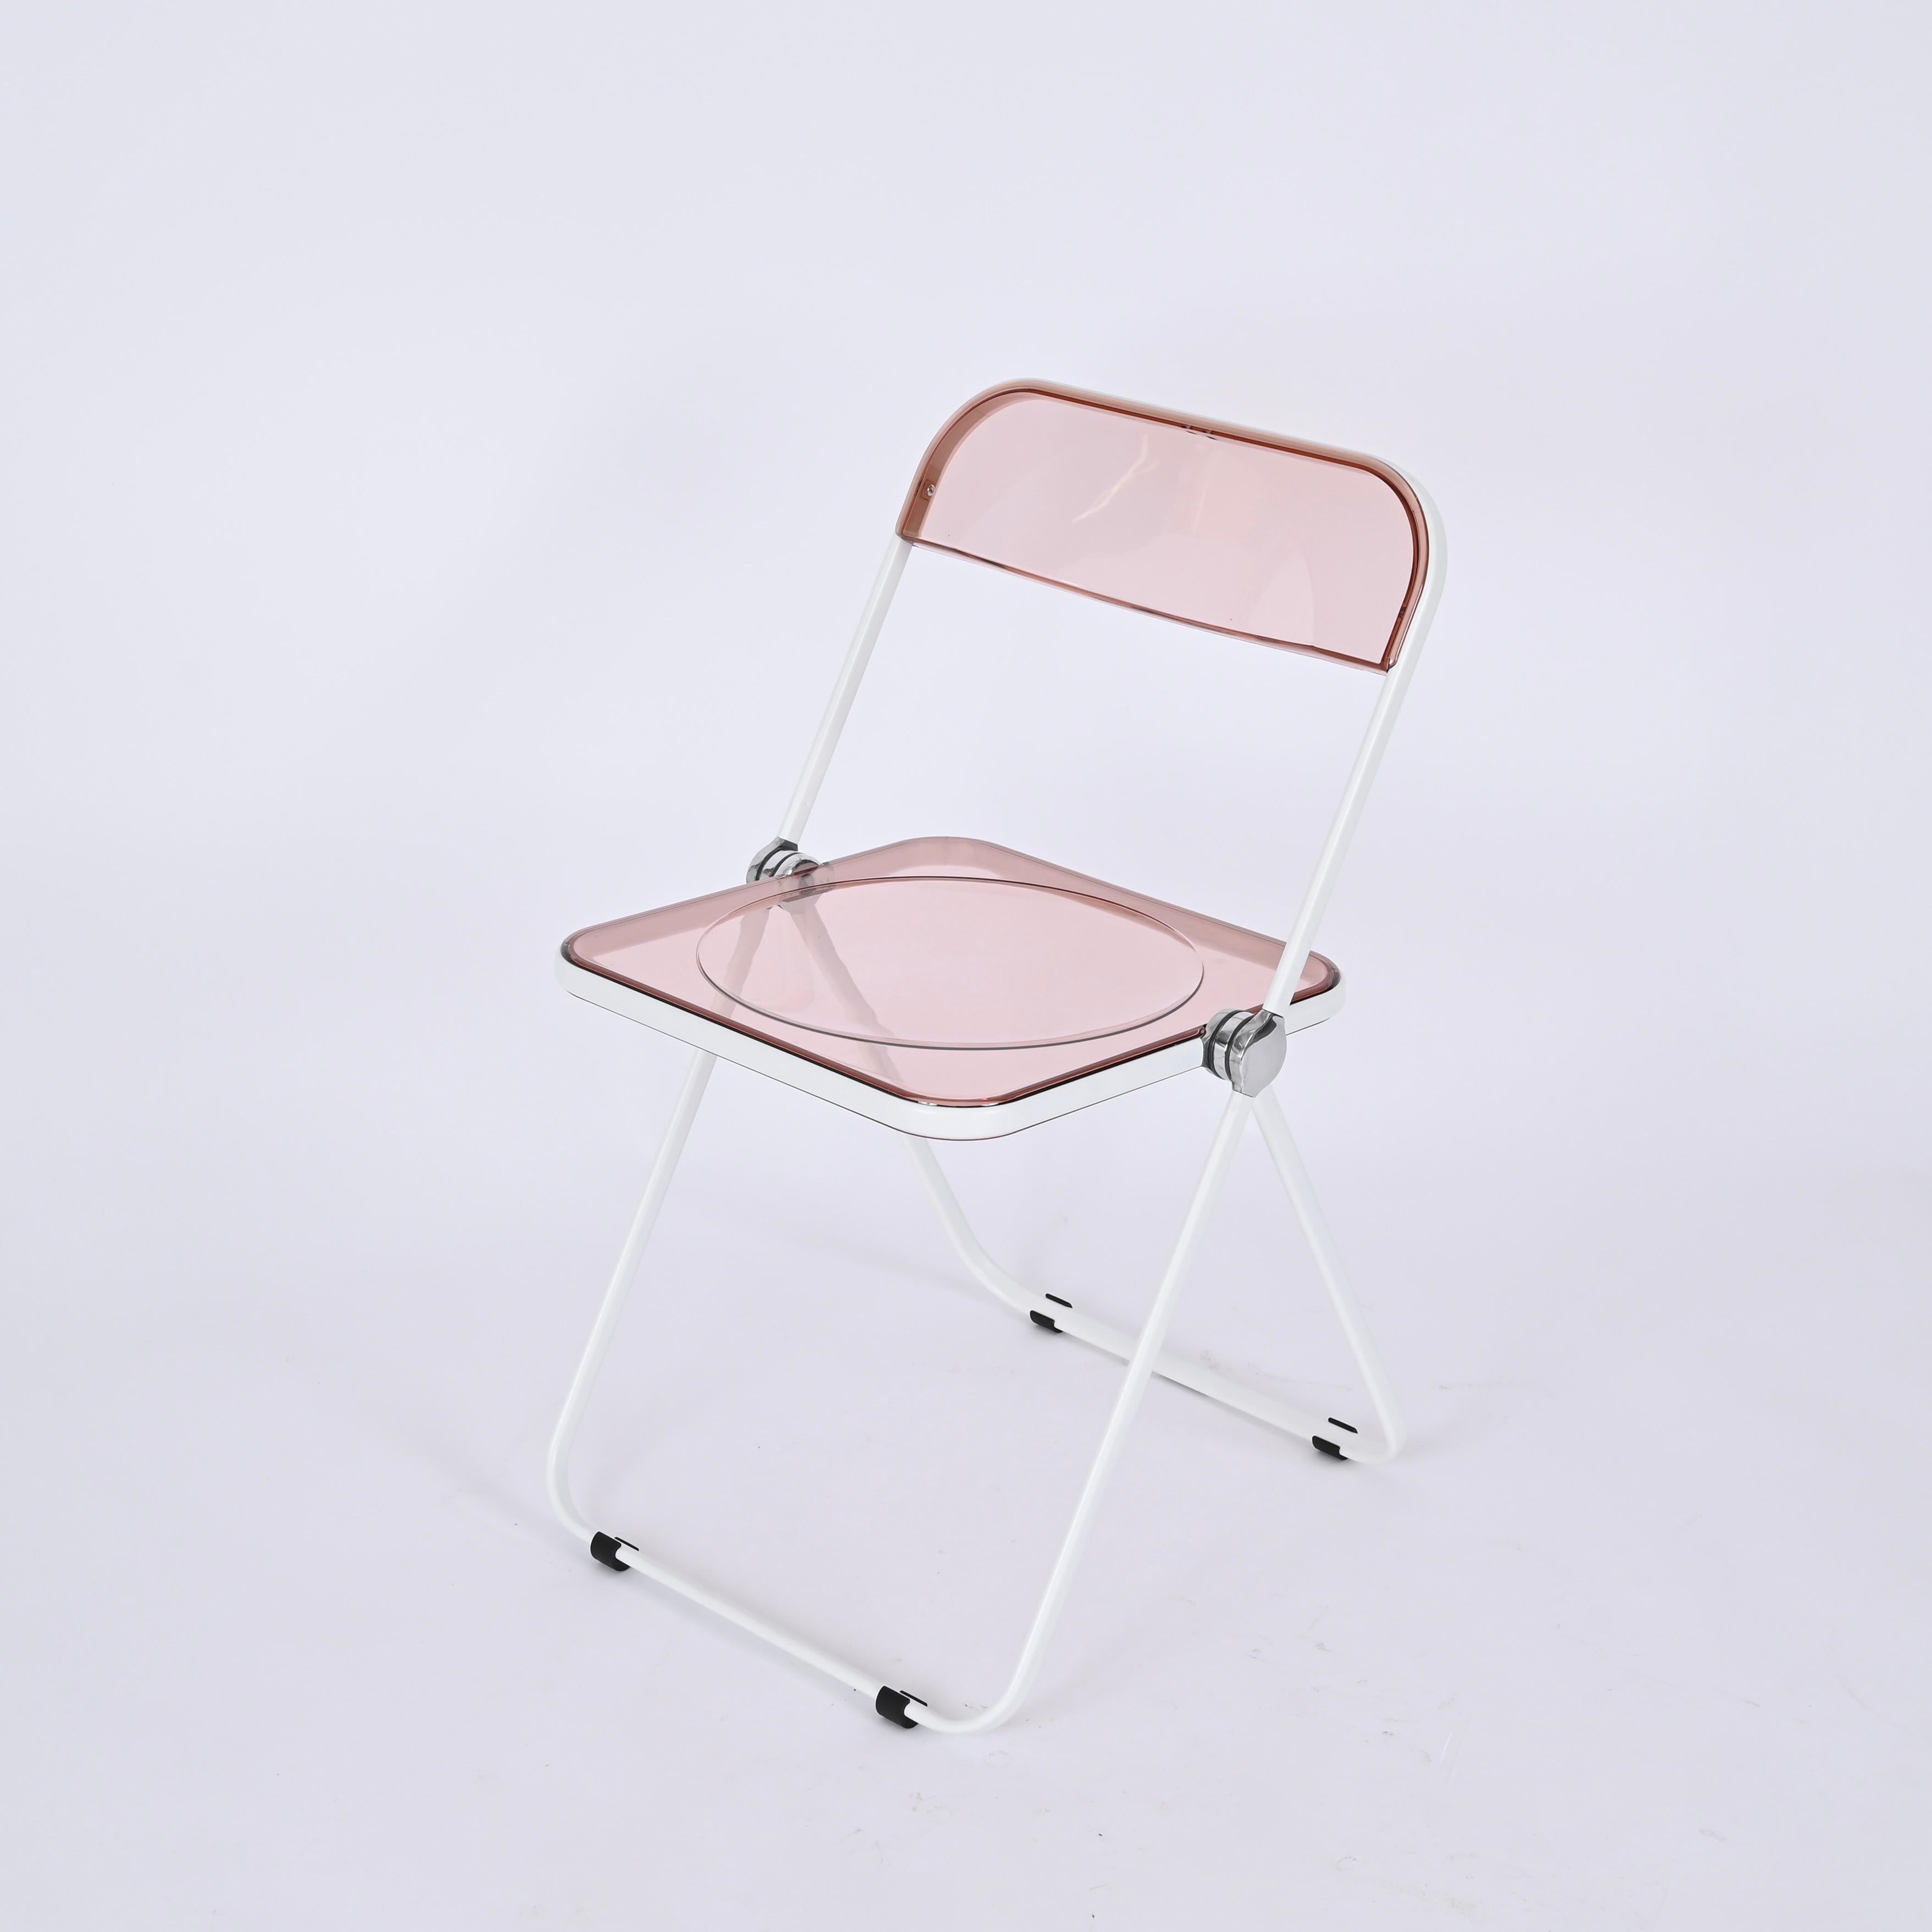 Giancarlo Piretti Lucite Pink and White Folding Plia Chairs for Castelli, 1970s For Sale 4